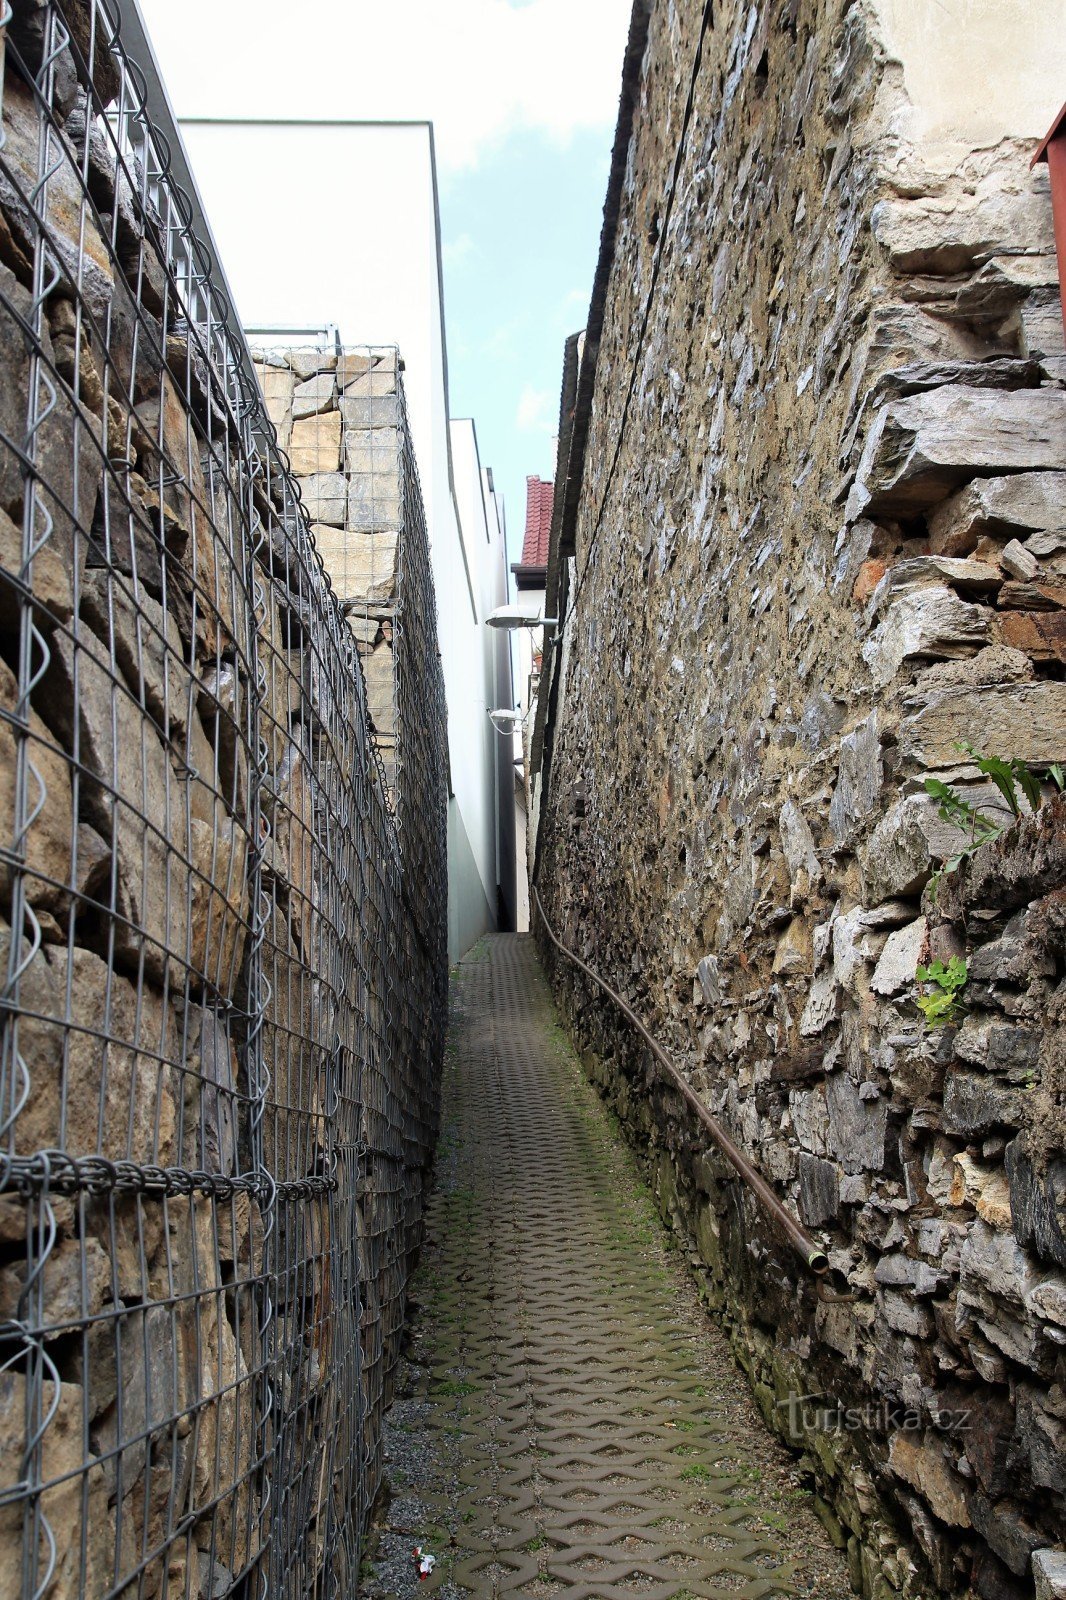 Olešnice - the narrowest alley